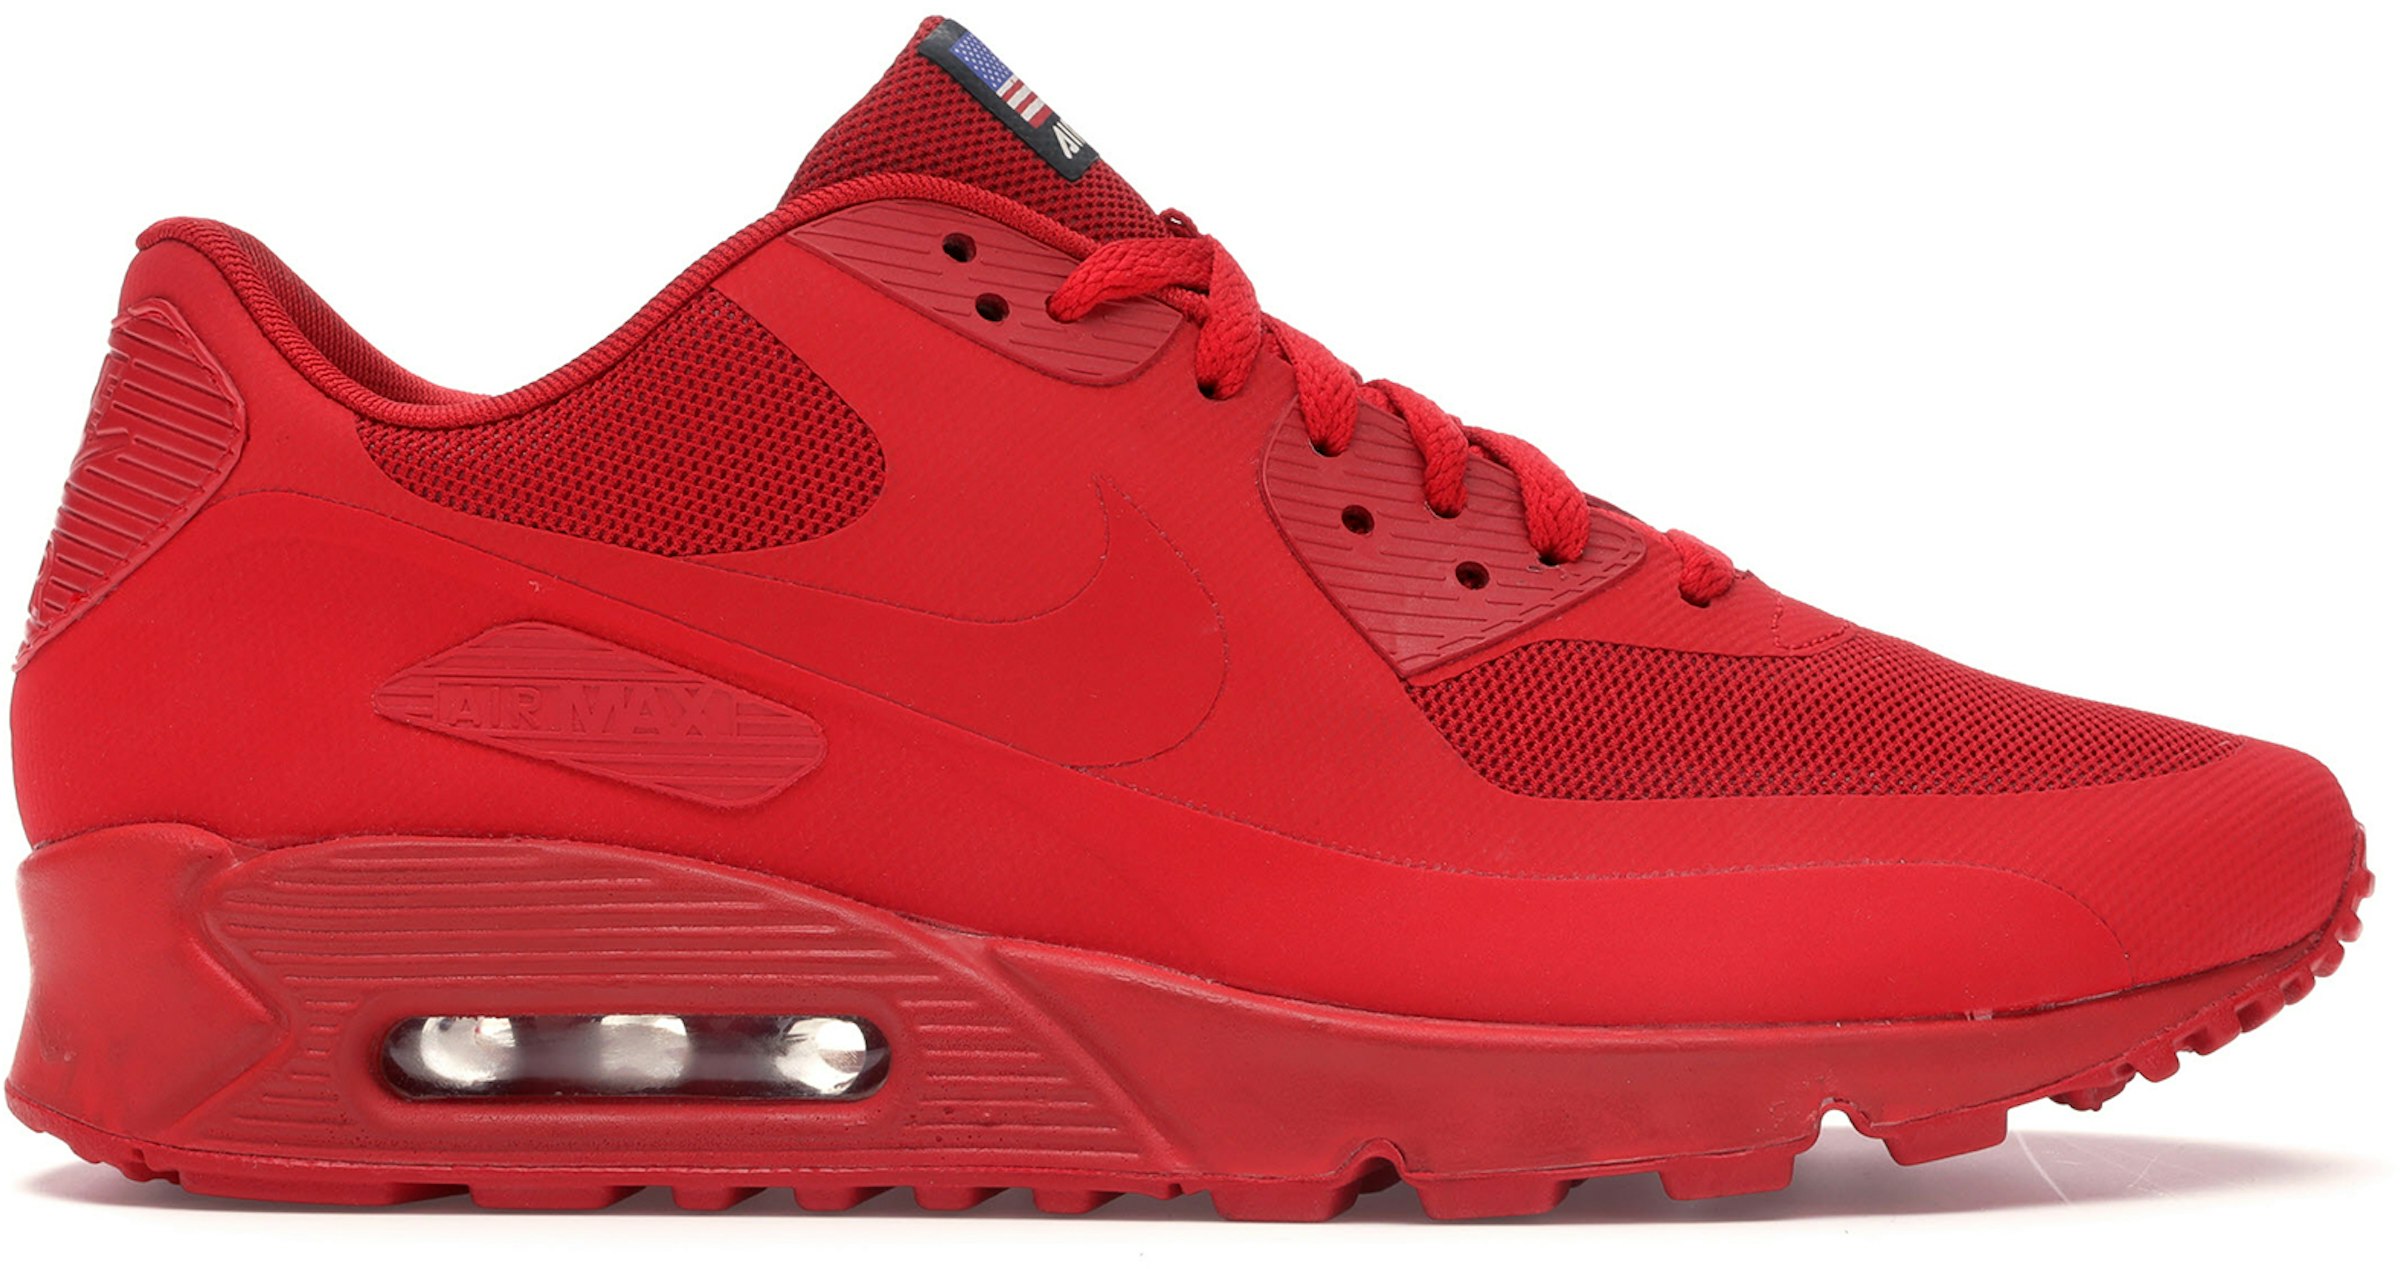 Doe een poging reptielen reservering Nike Air Max 90 Hyperfuse Independence Day Red Men's - 613841-660 - US